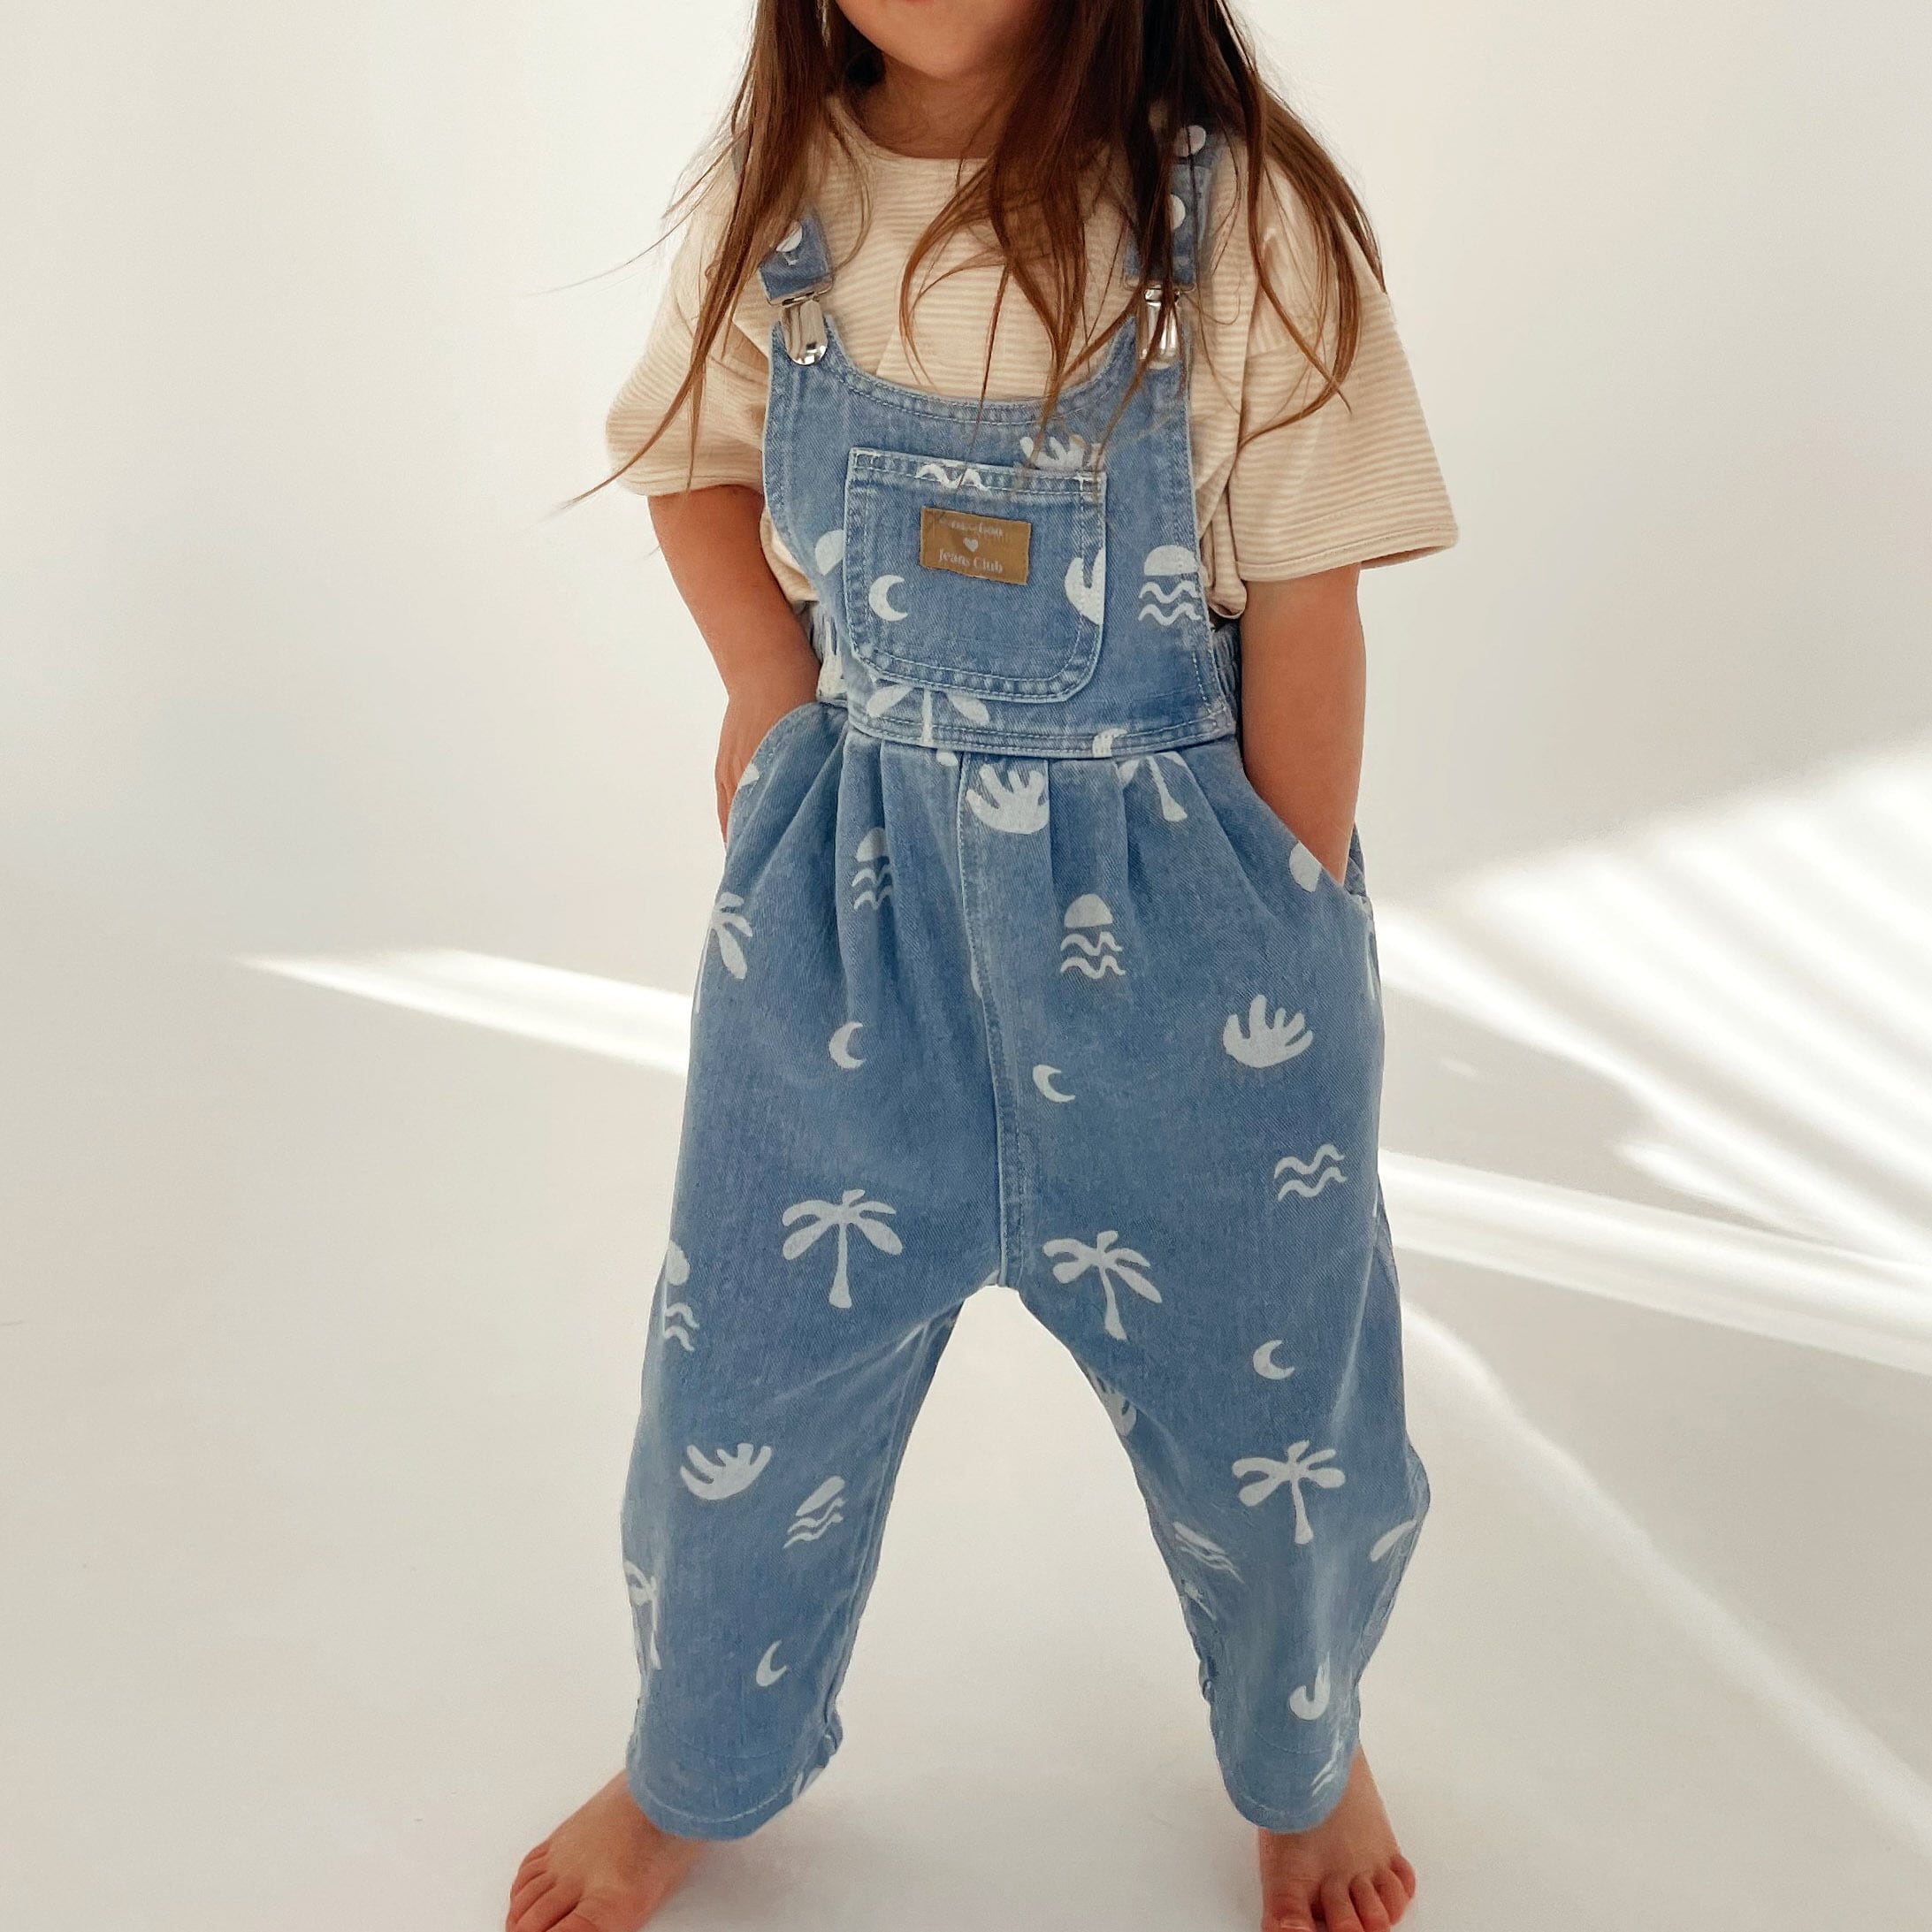 TWIN COLLECTIVE×bamlovesboo】Bowie Bubble Overall - Cali Print